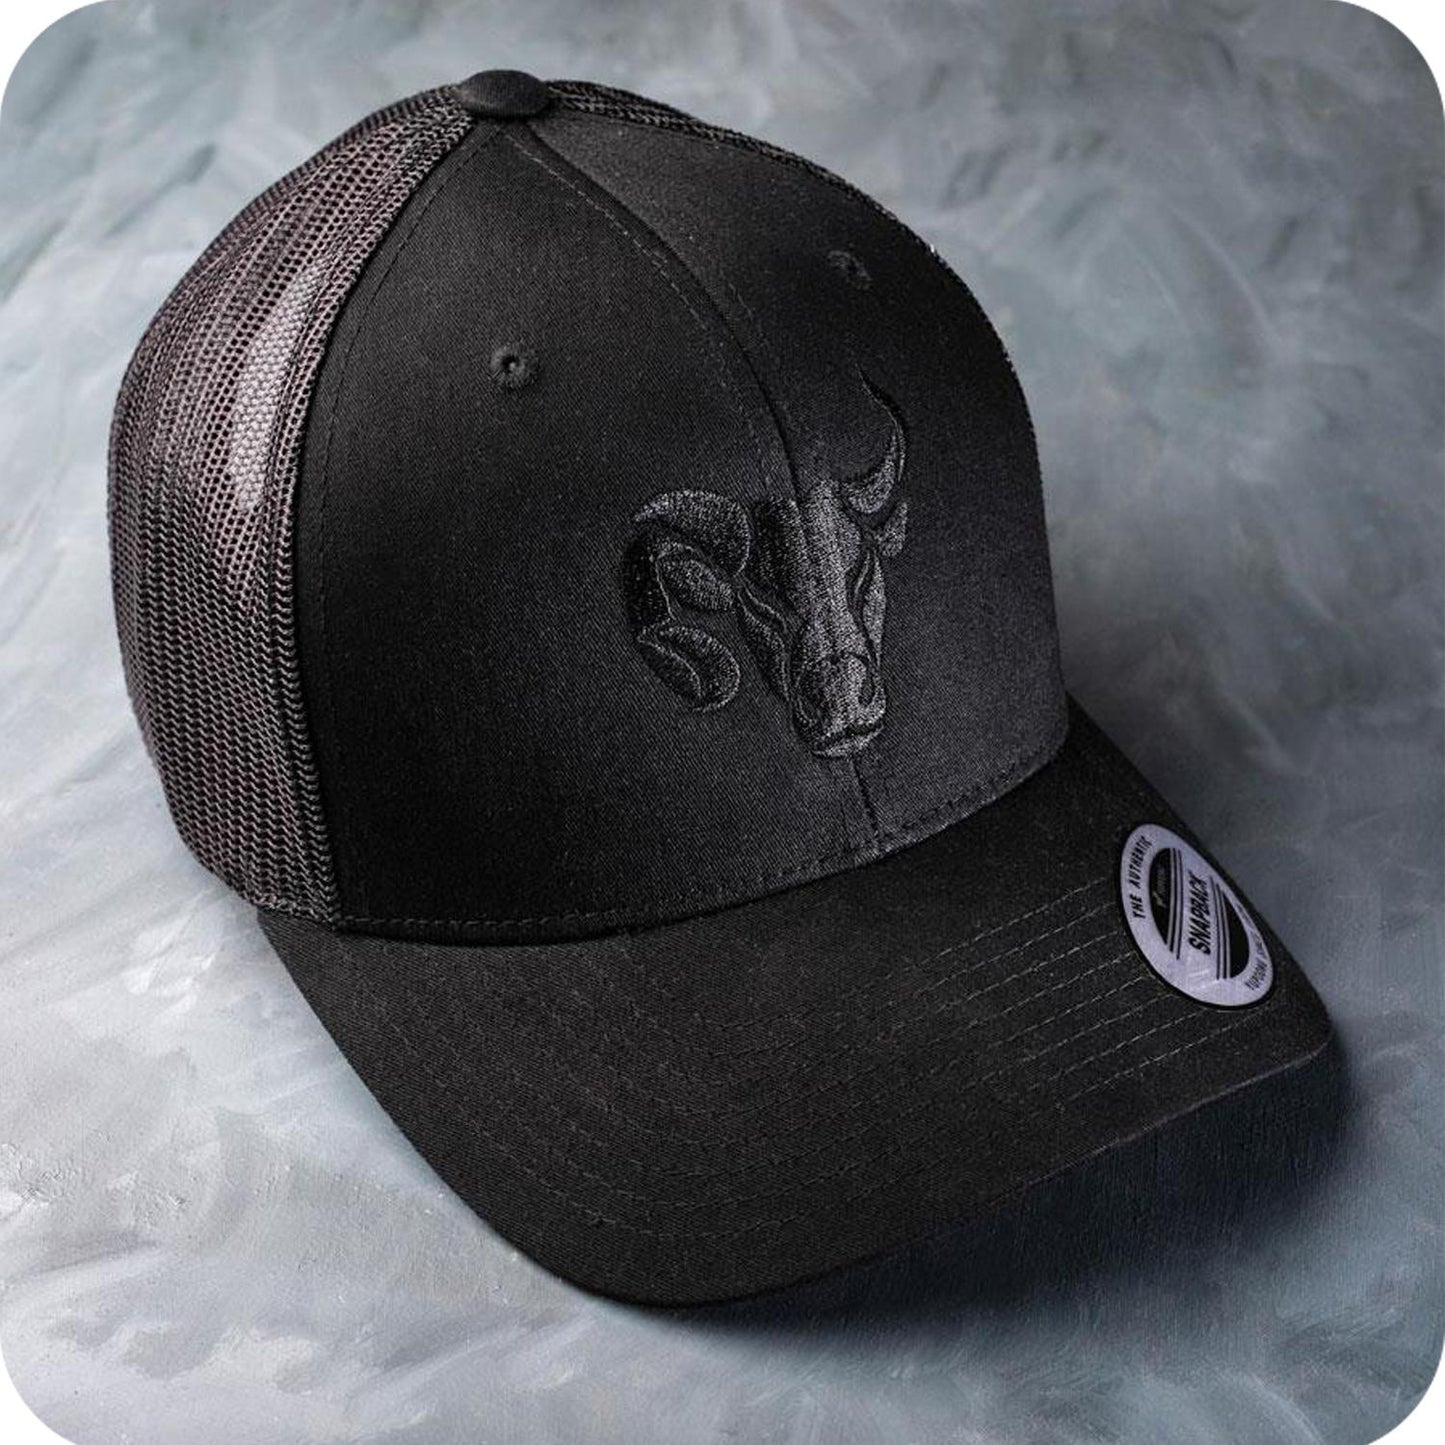 Black Solid Cap With Embroidered Design Imprint